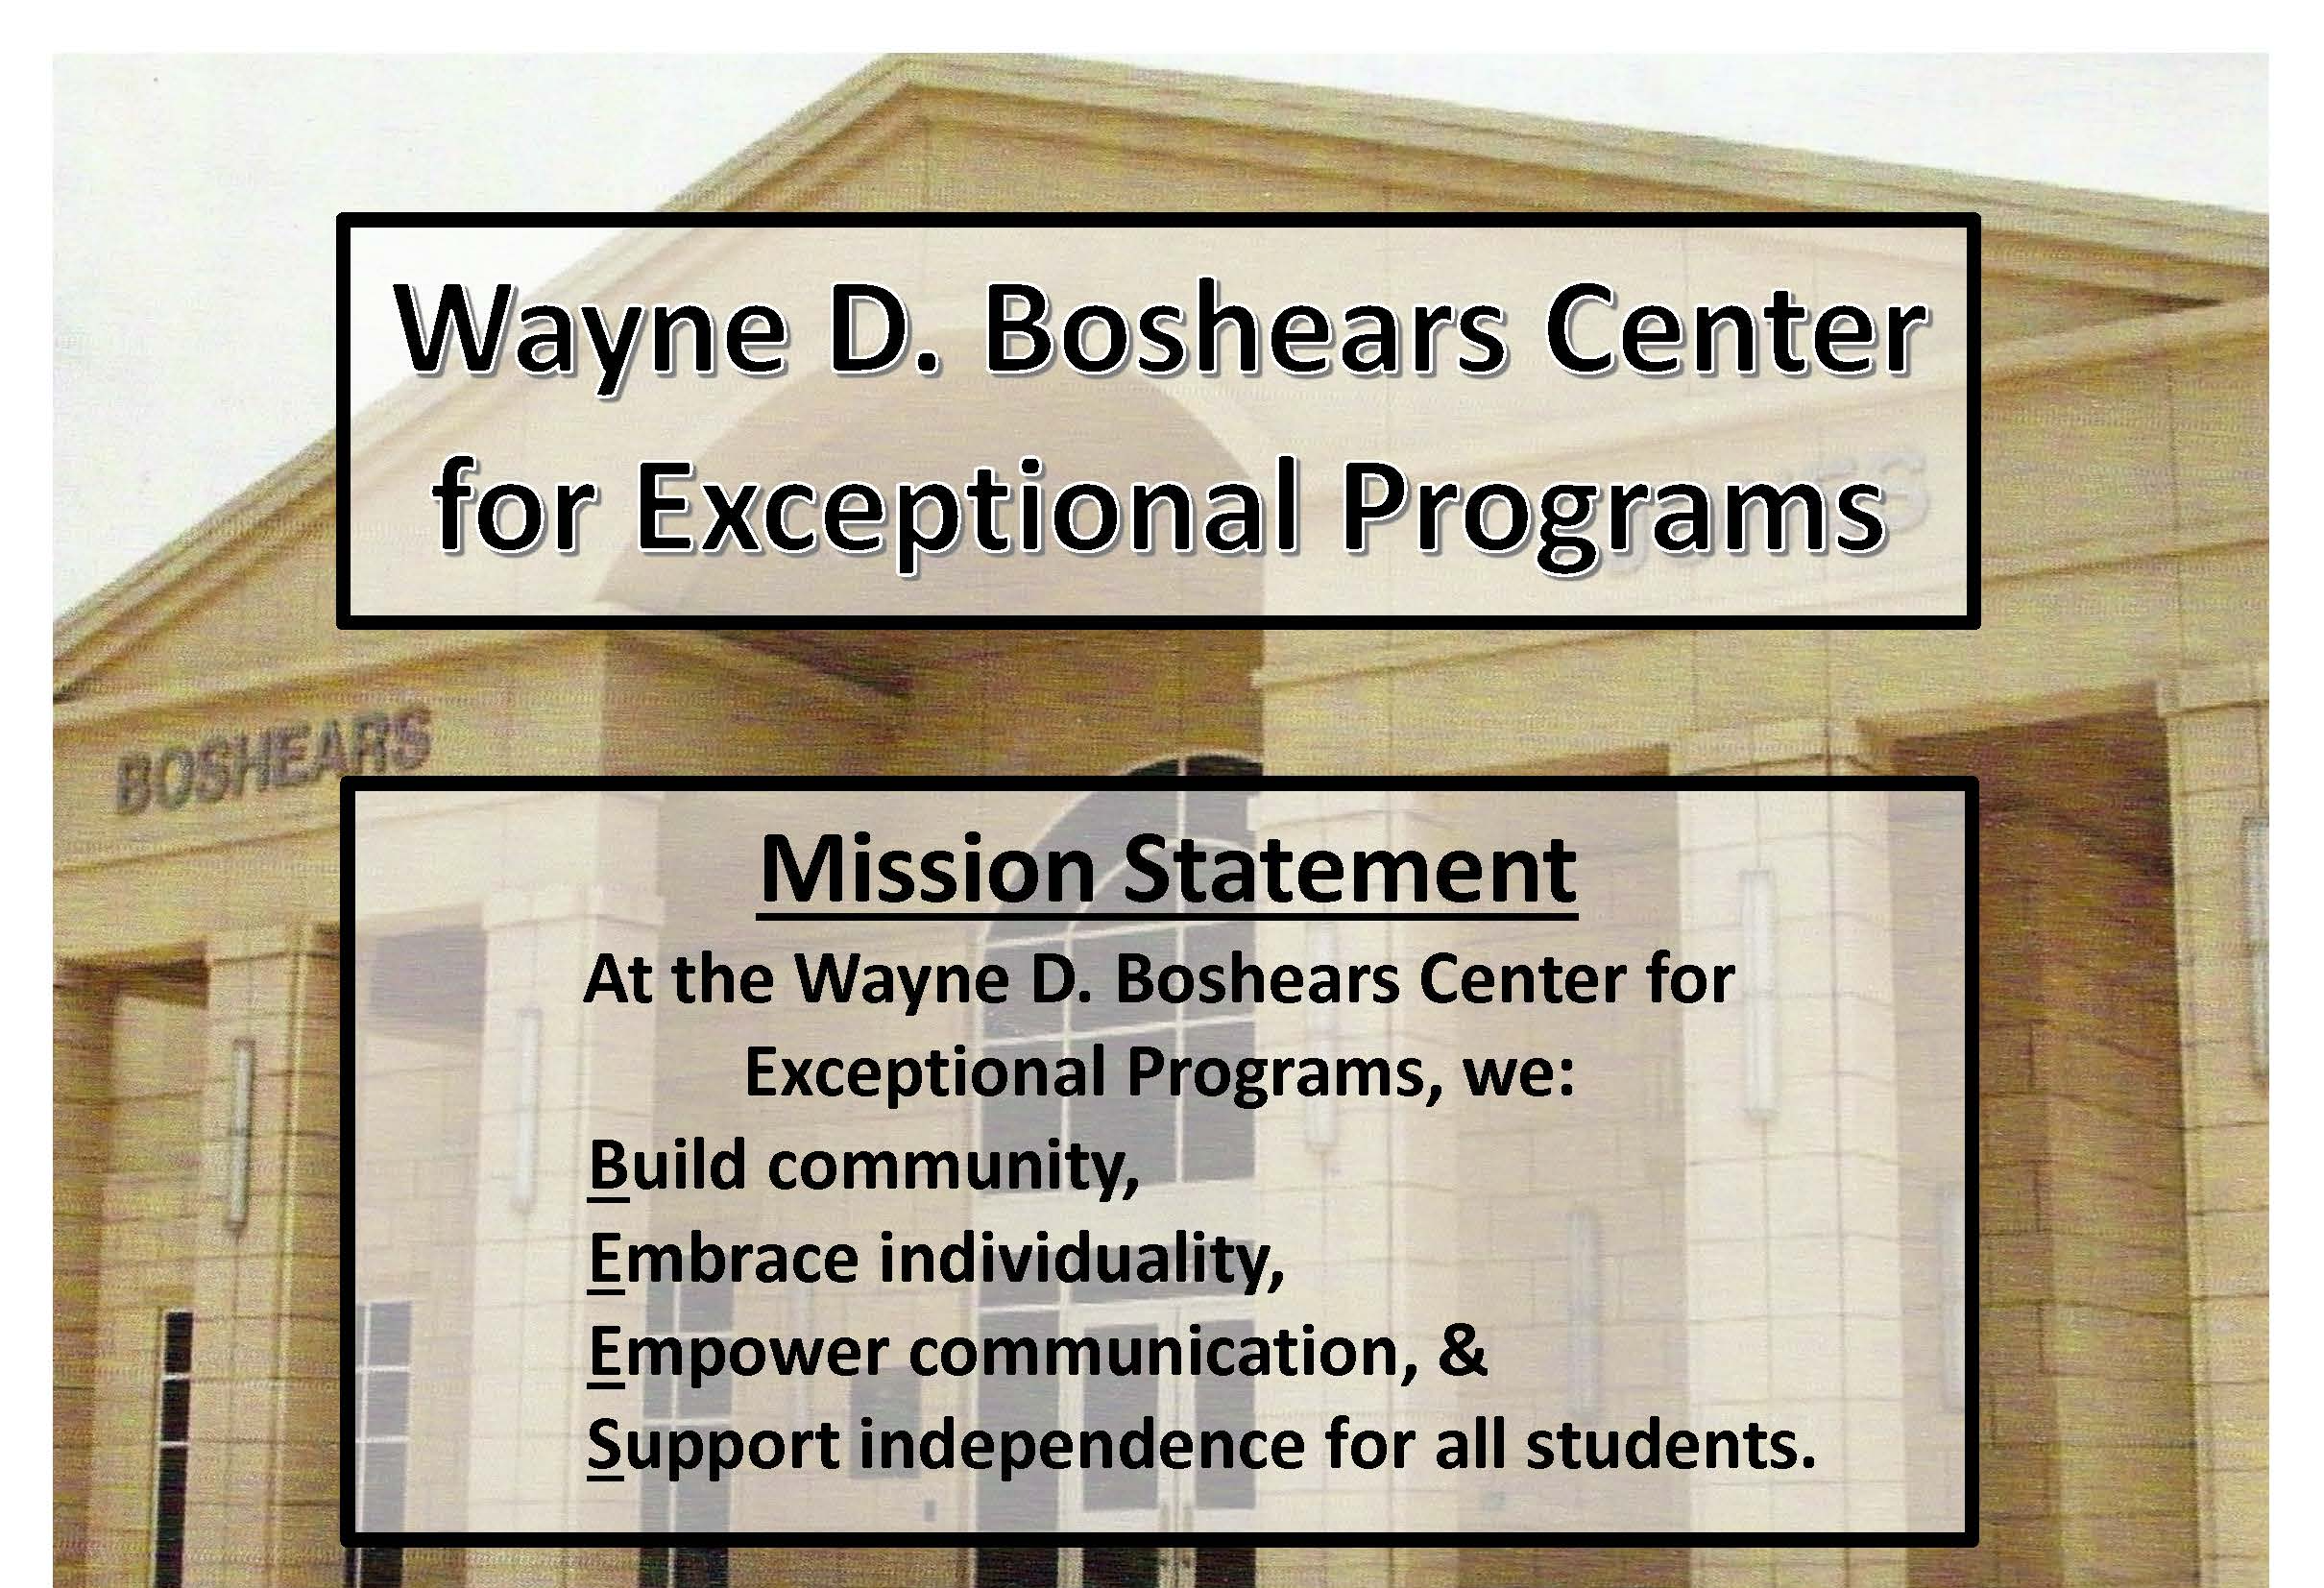 Mission Statement : At the Wayne D. Boshears Center for Exceptional Programs, we: Build community, Embrace individuality, Empower communication, & Support independence for all students.